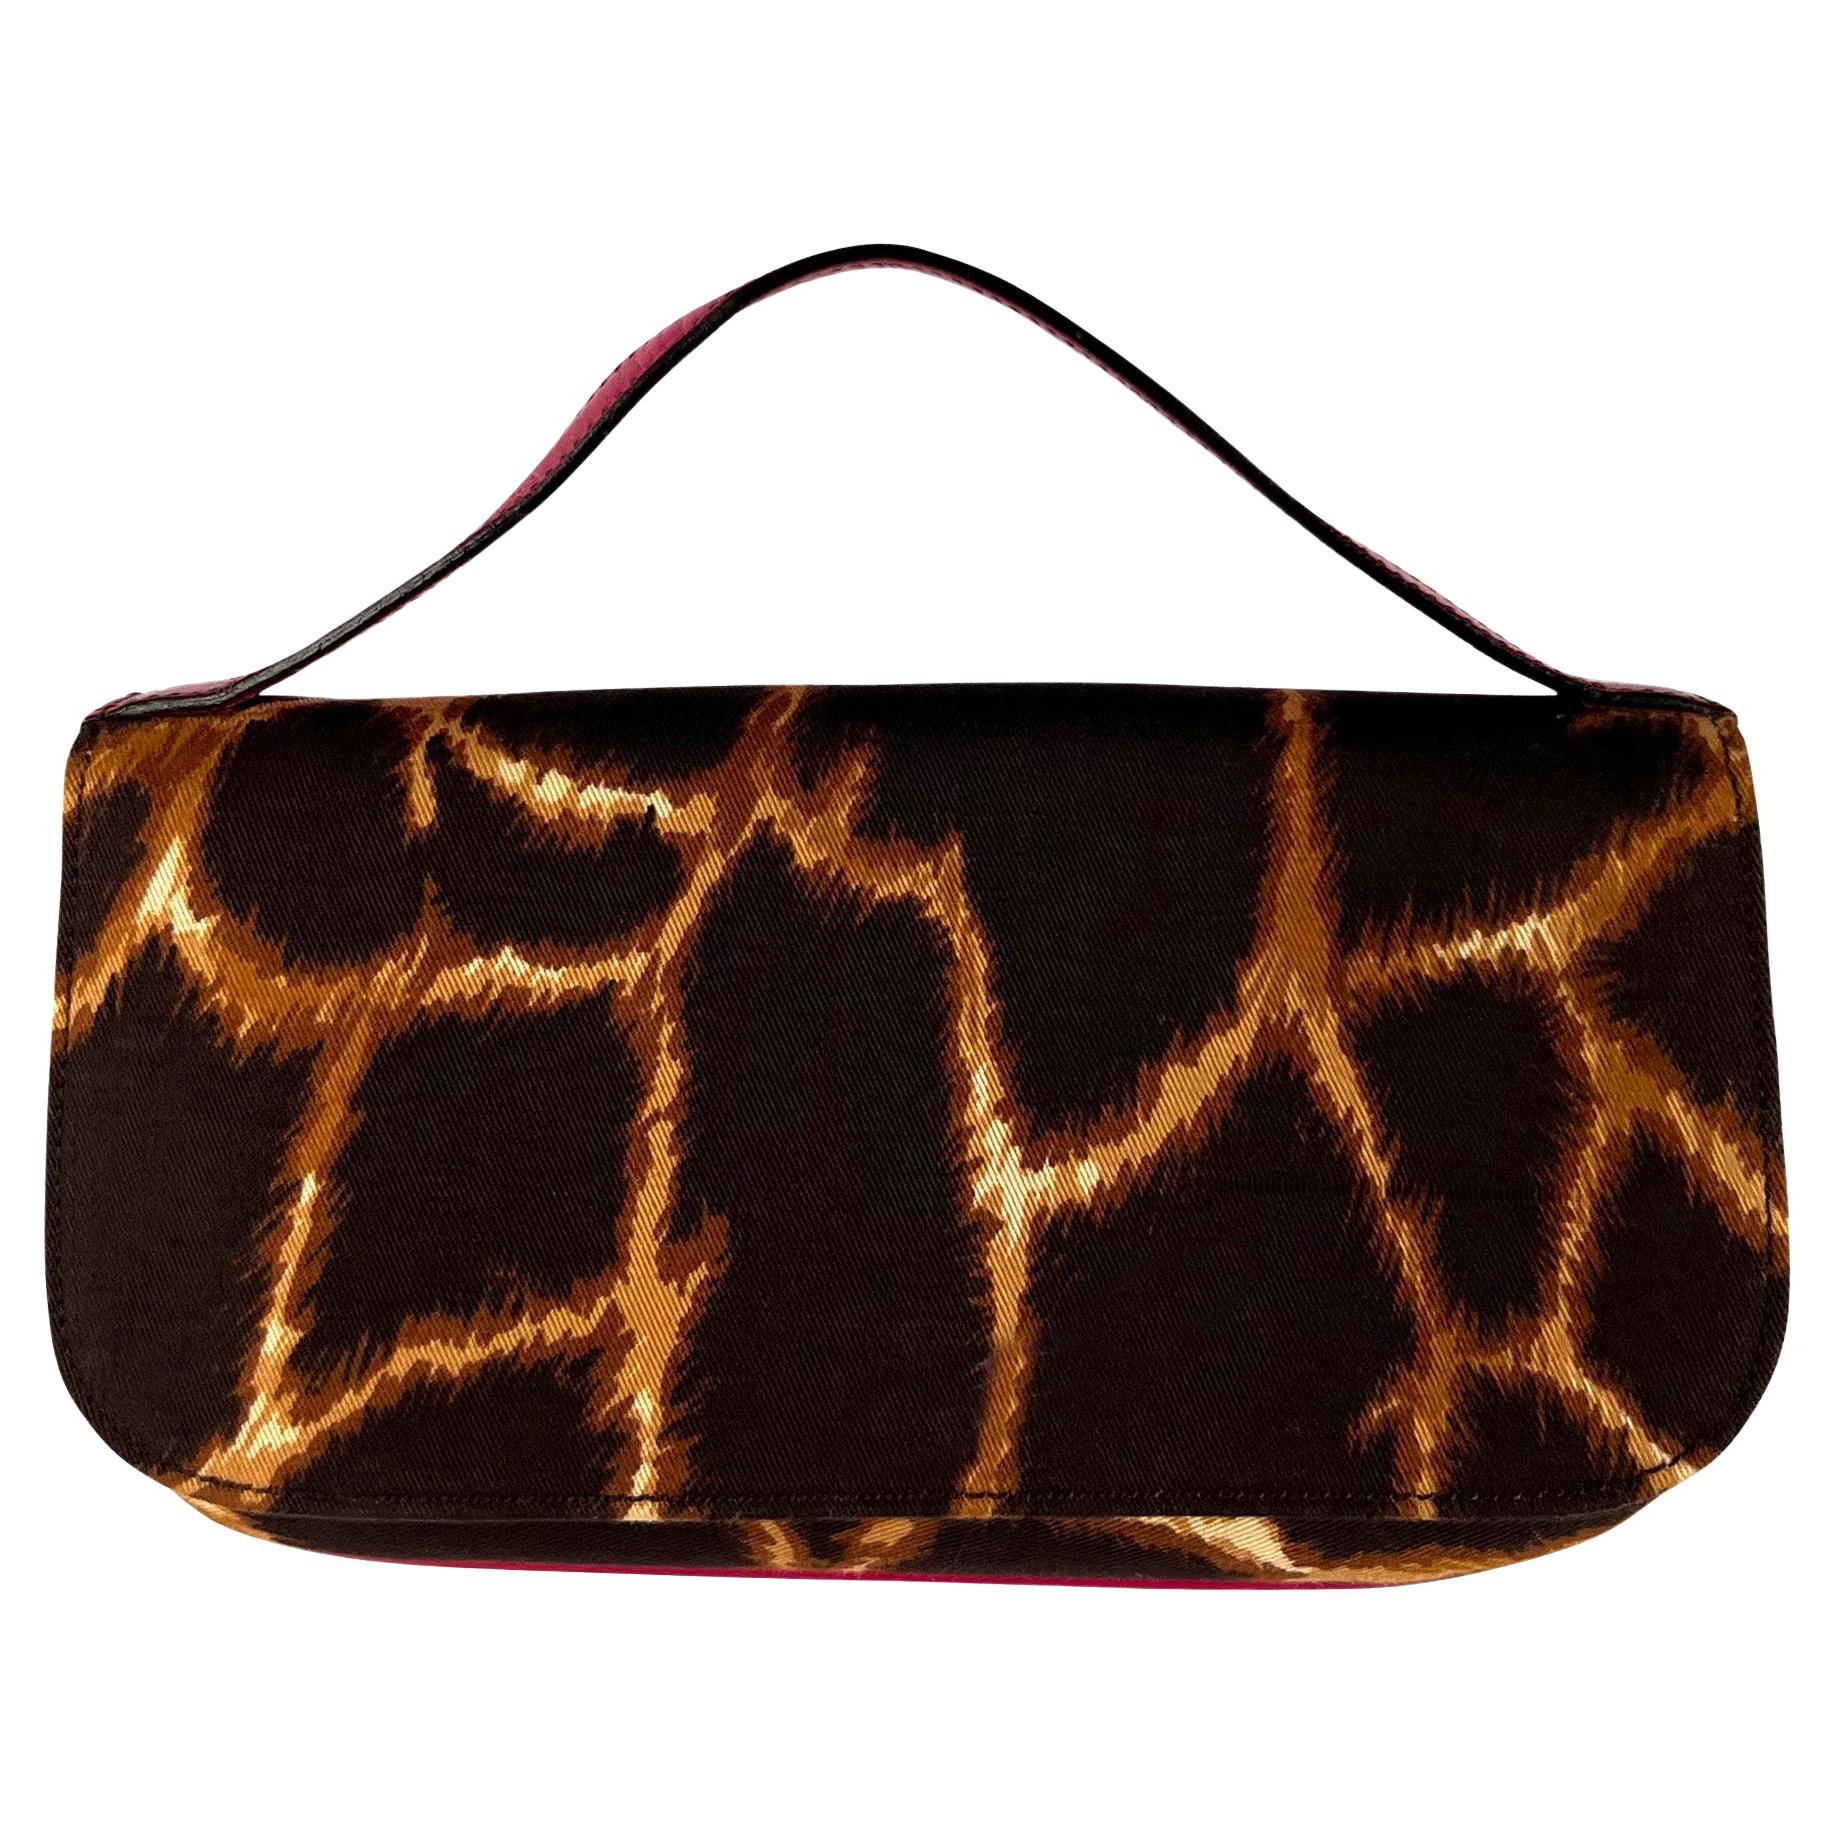 2000s Dolce & Gabbana Brown Animal Print Hot Pink Leather Top Strap Clutch Bag For Sale